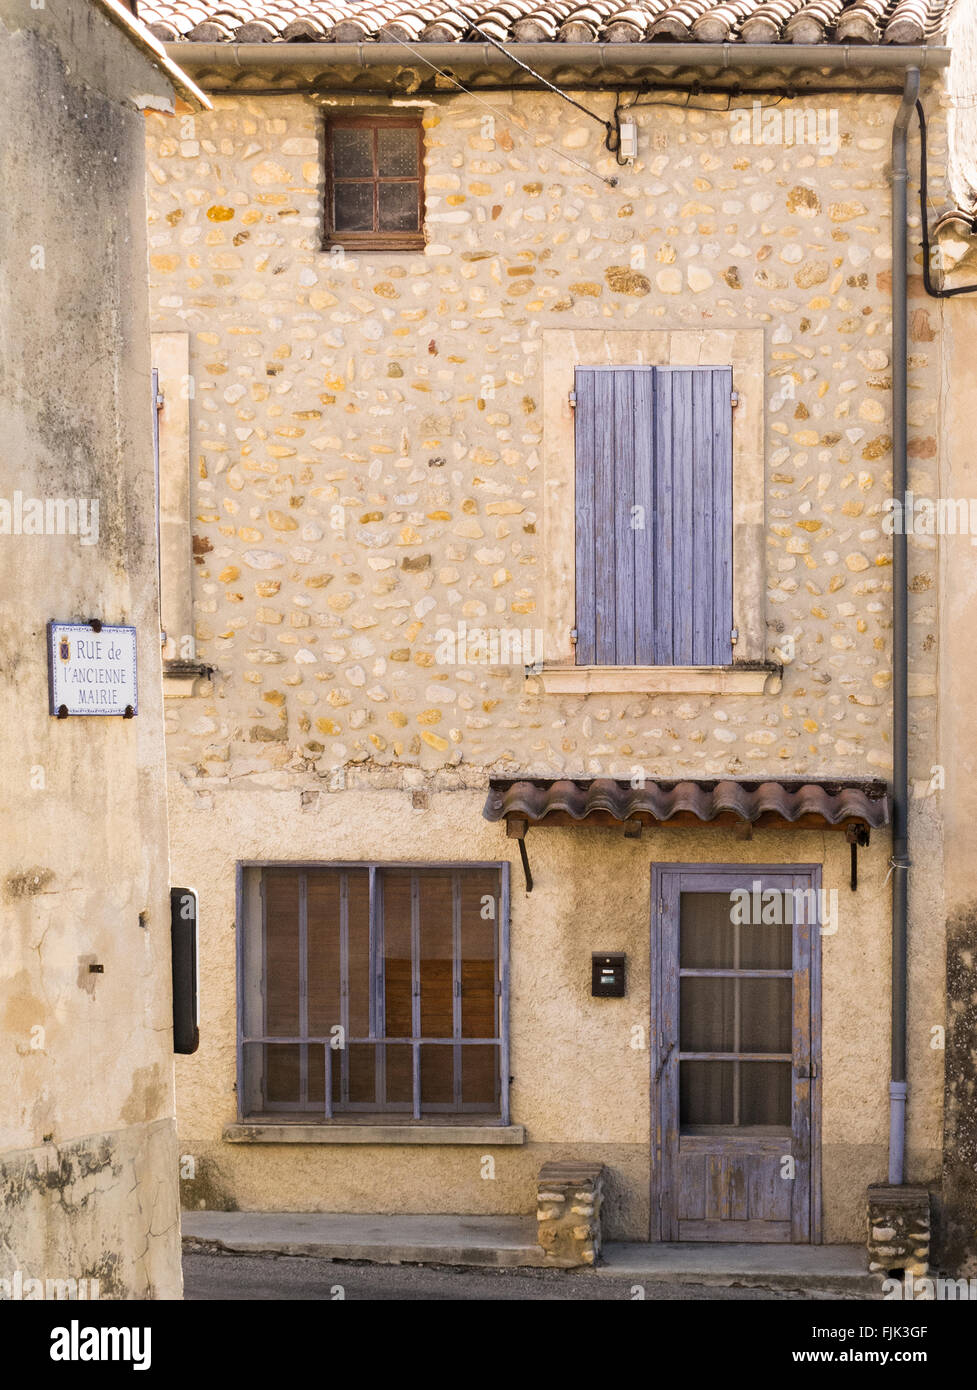 Rustic old stone house with painted shutters in the historic village of Rasteau, Vaucluse, Provence, France. Typical local architecture. Stock Photo